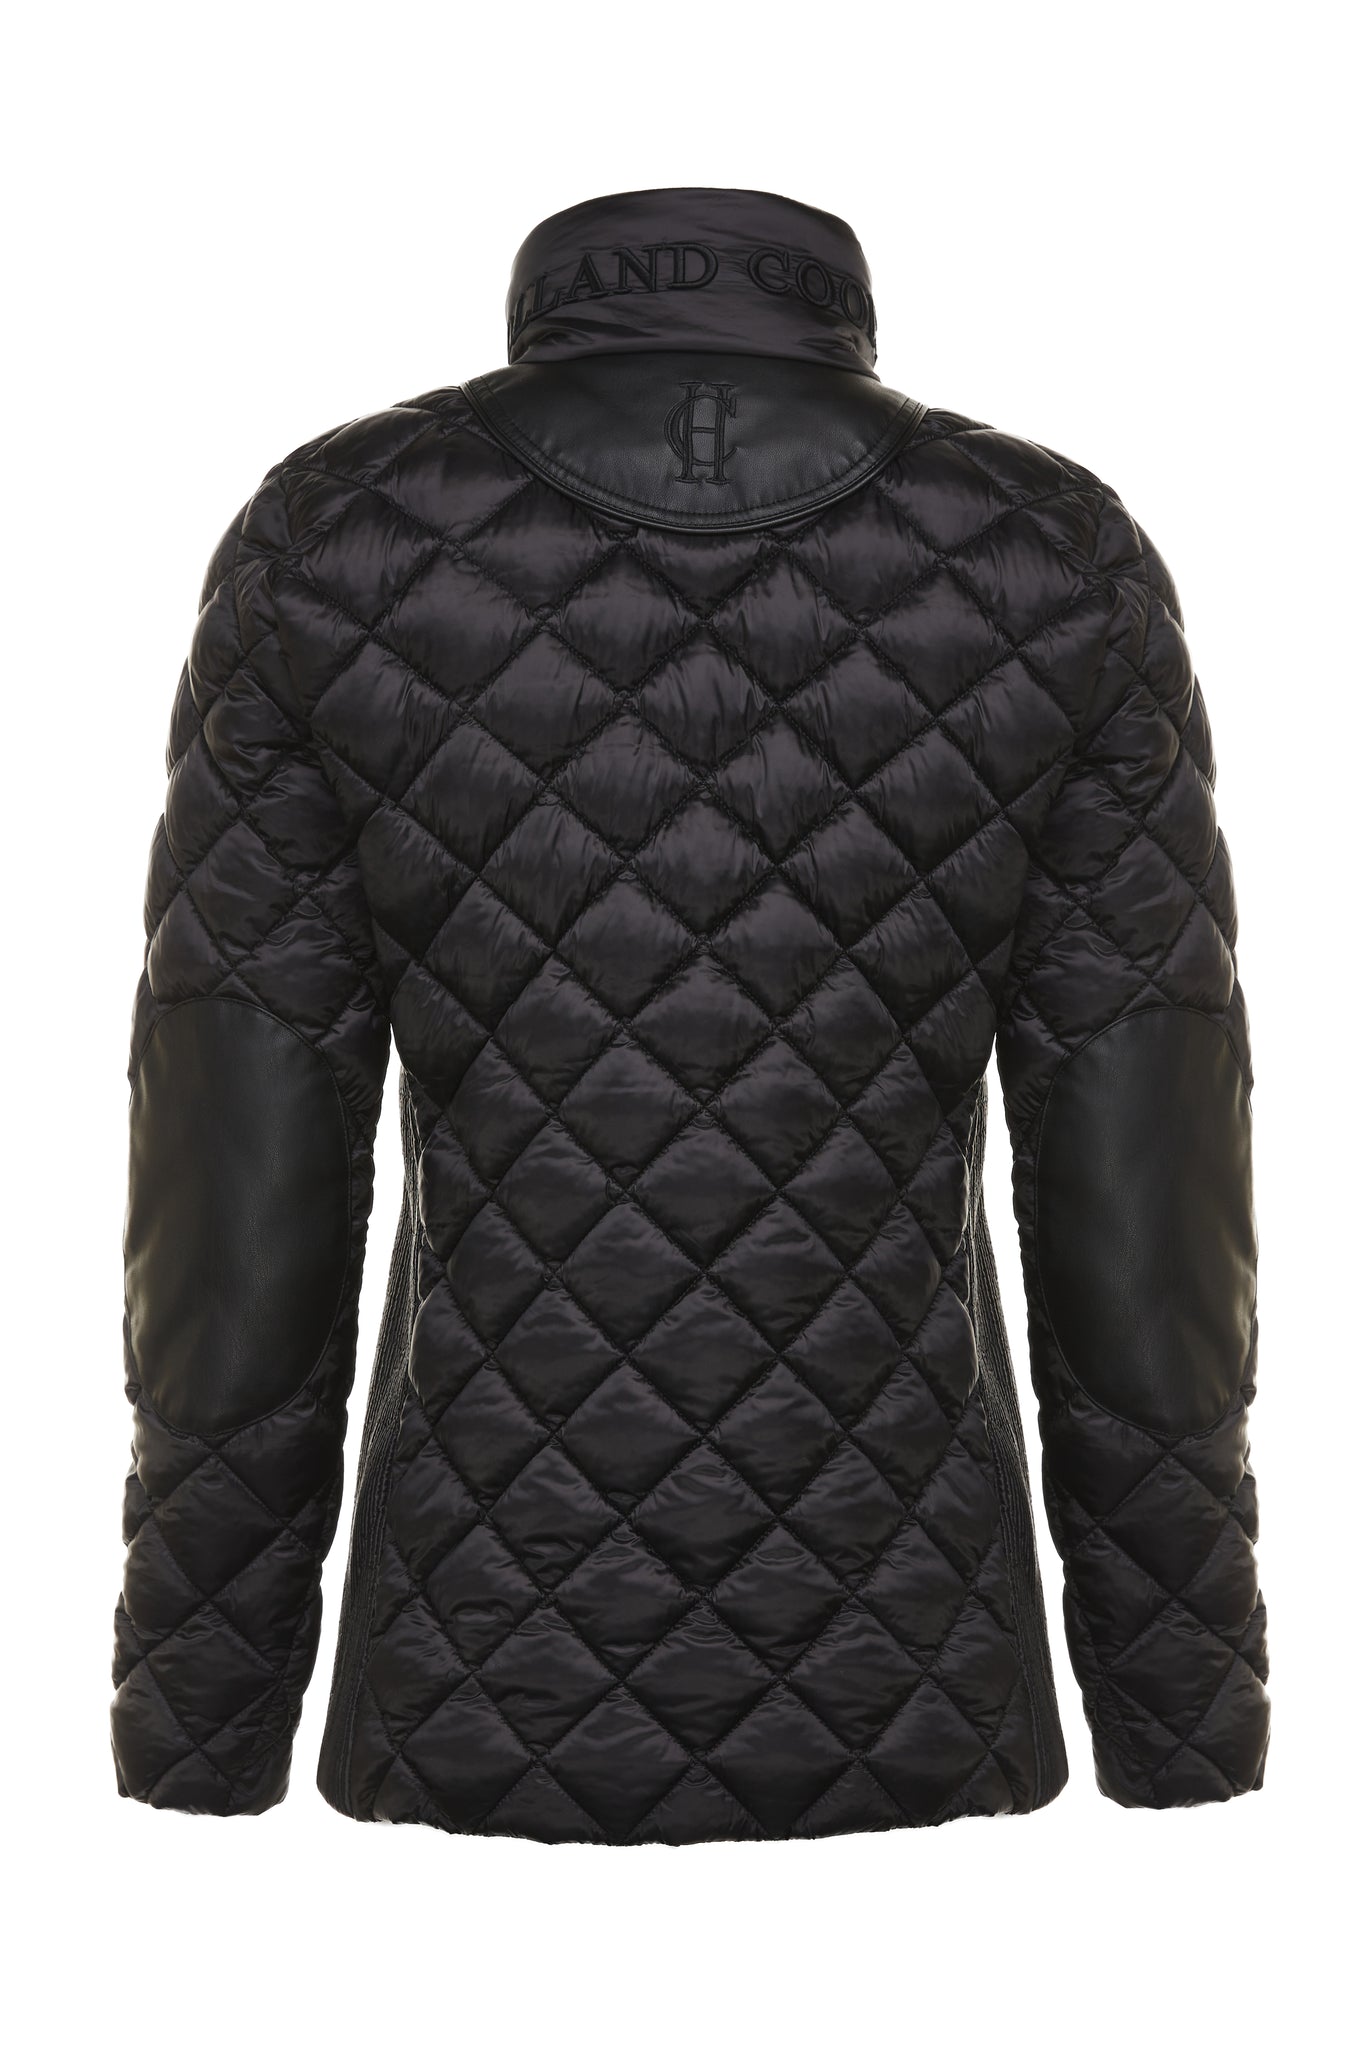 back of womens diamond quilted black jacket with contrast black leather elbow and shoulder pads large front pockets and shirred side panels